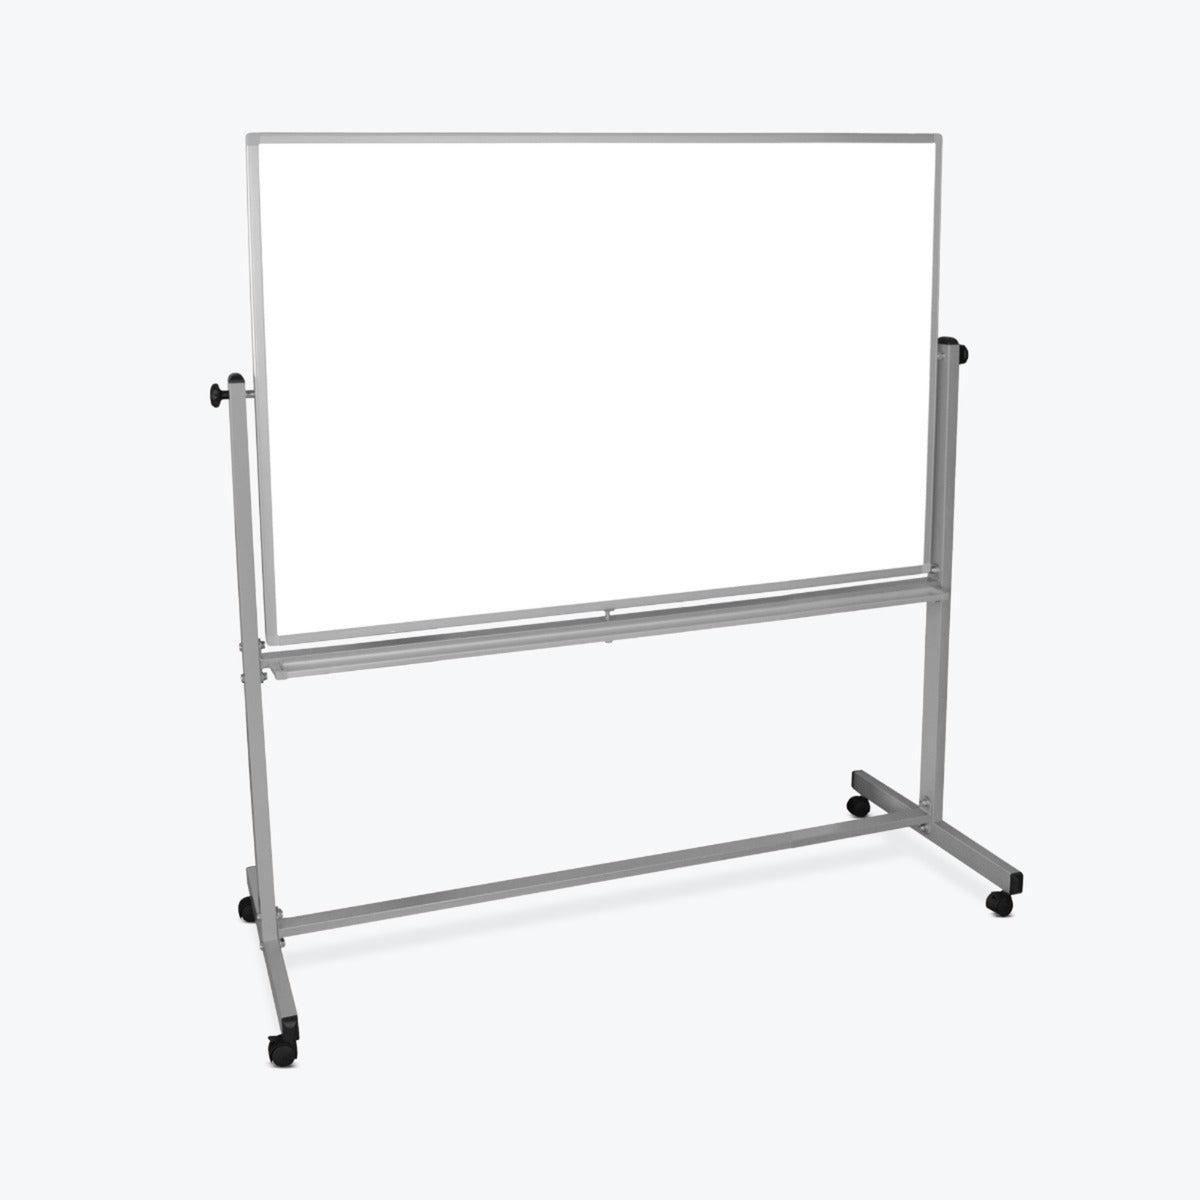 60"W x 40"H Mobile Double-Sided Magnetic Whiteboard